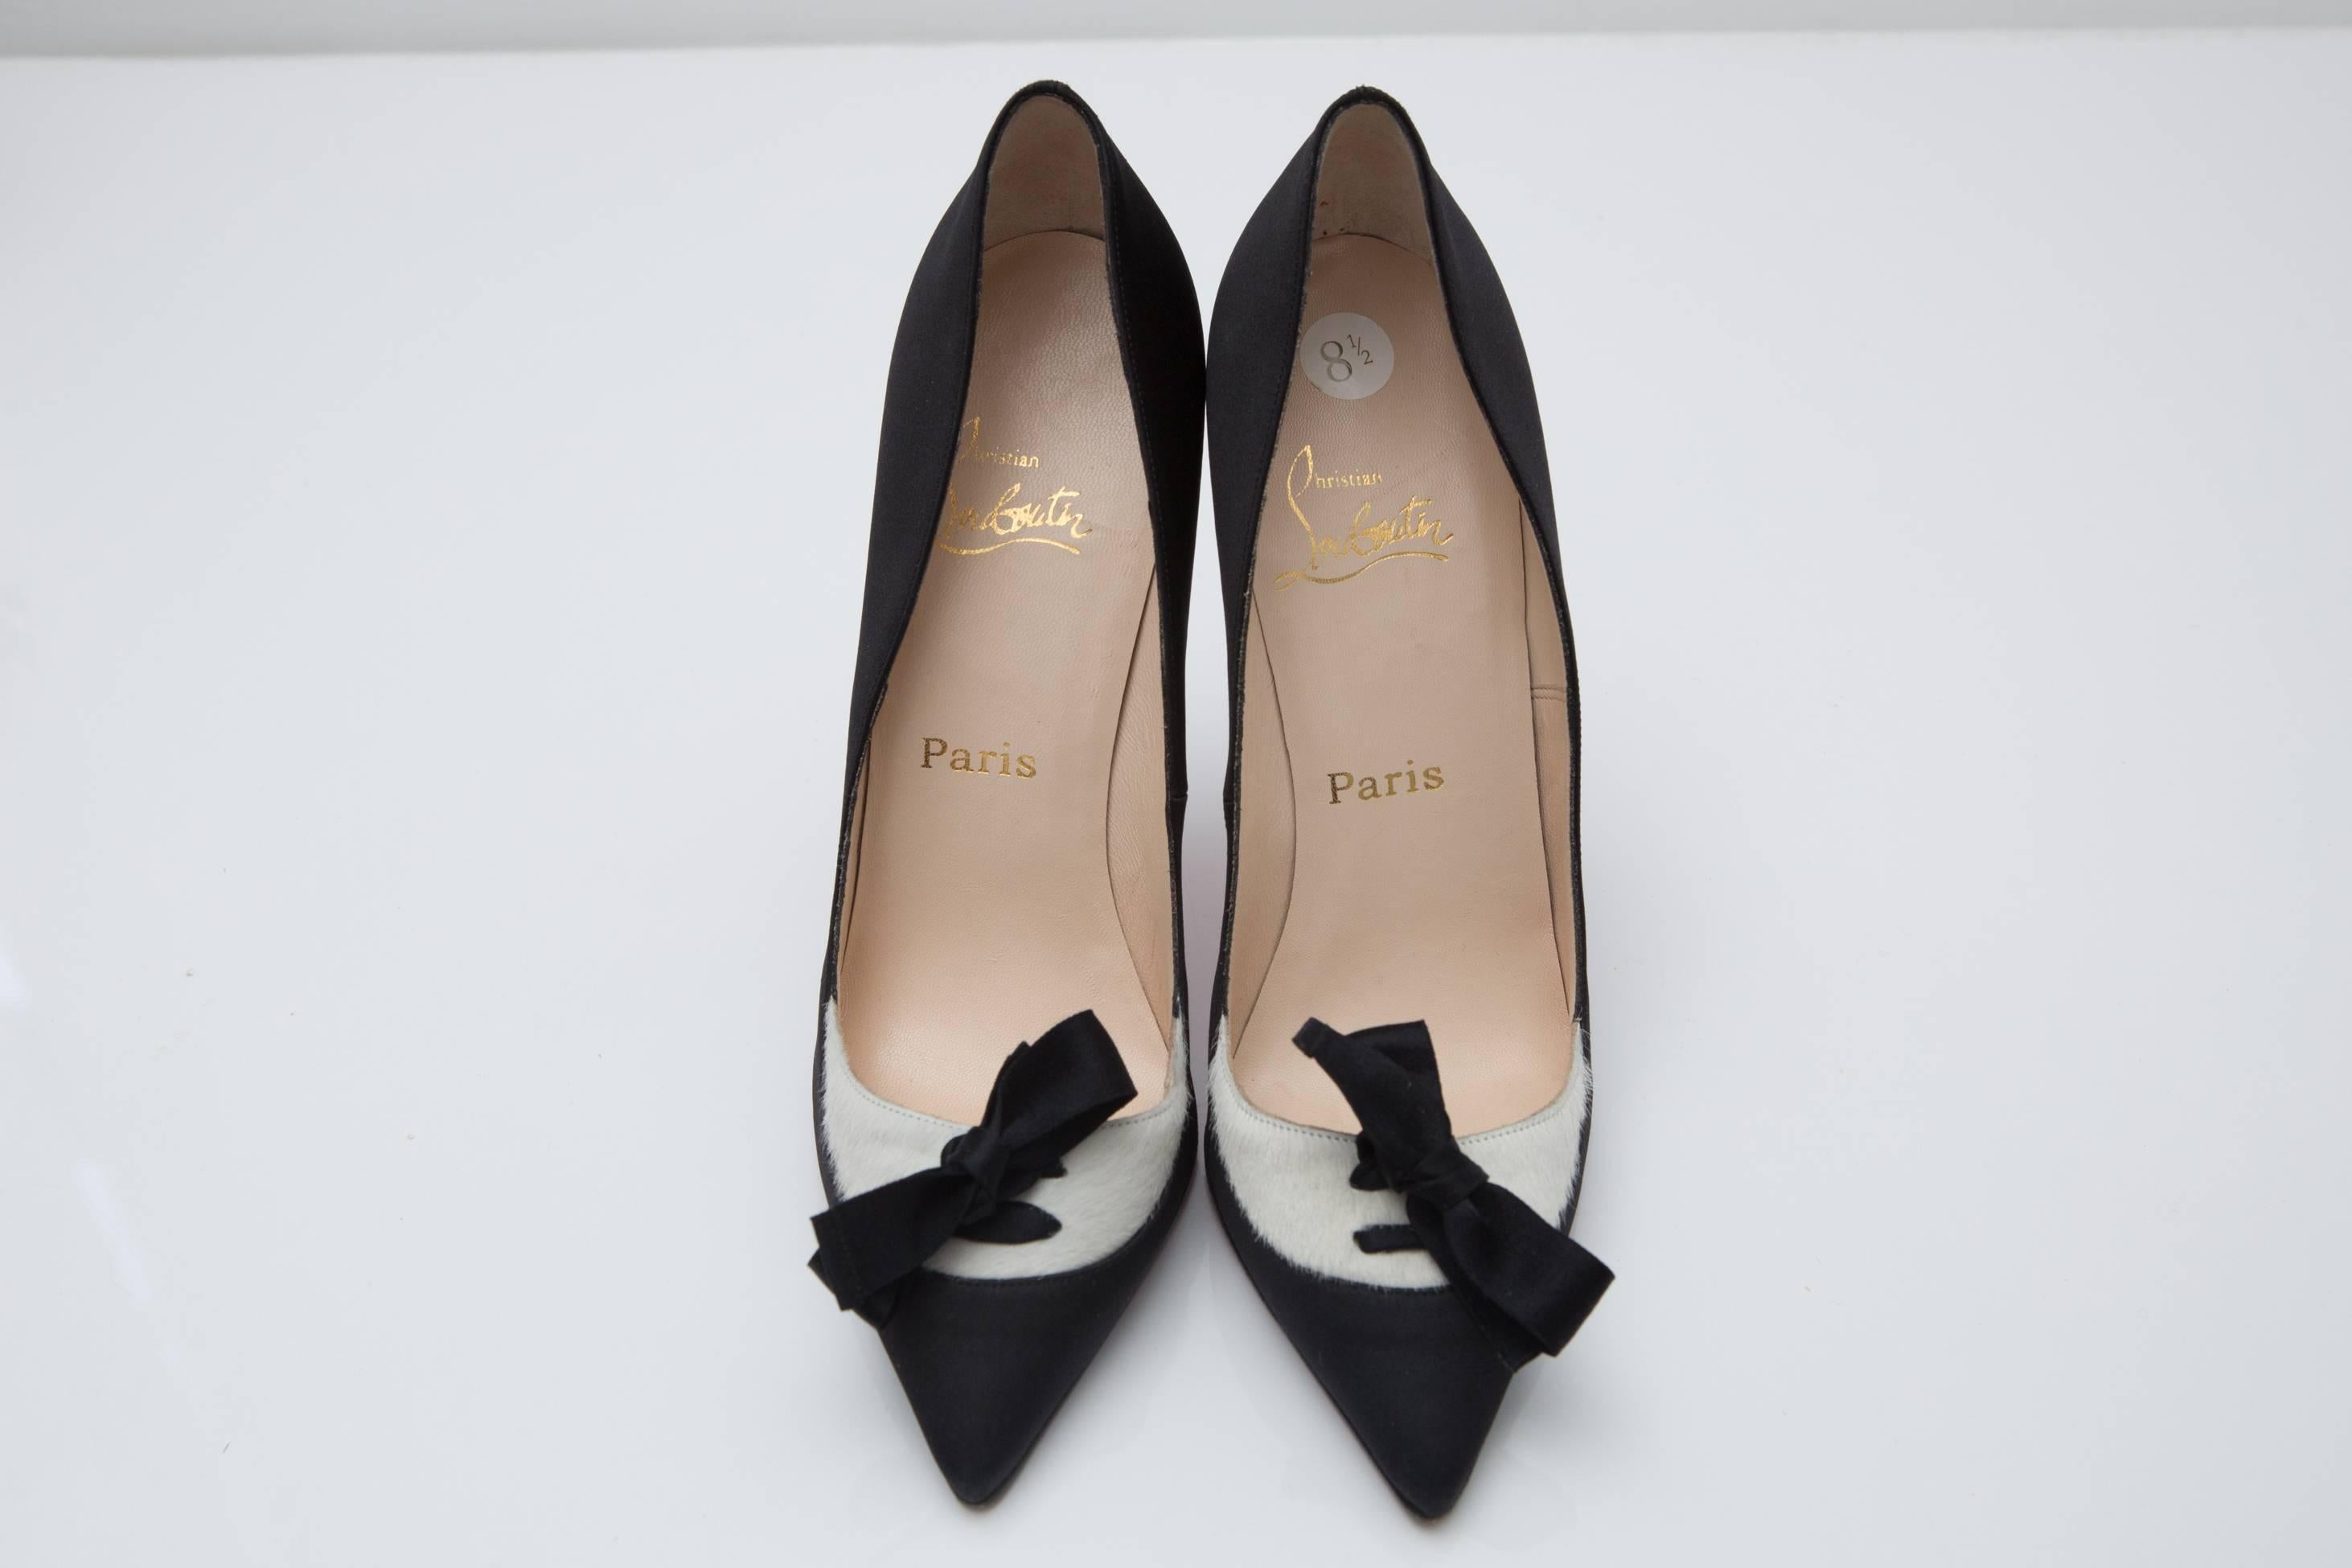 'So Kate' style pony hair pointy toe pumps with lace up detail.